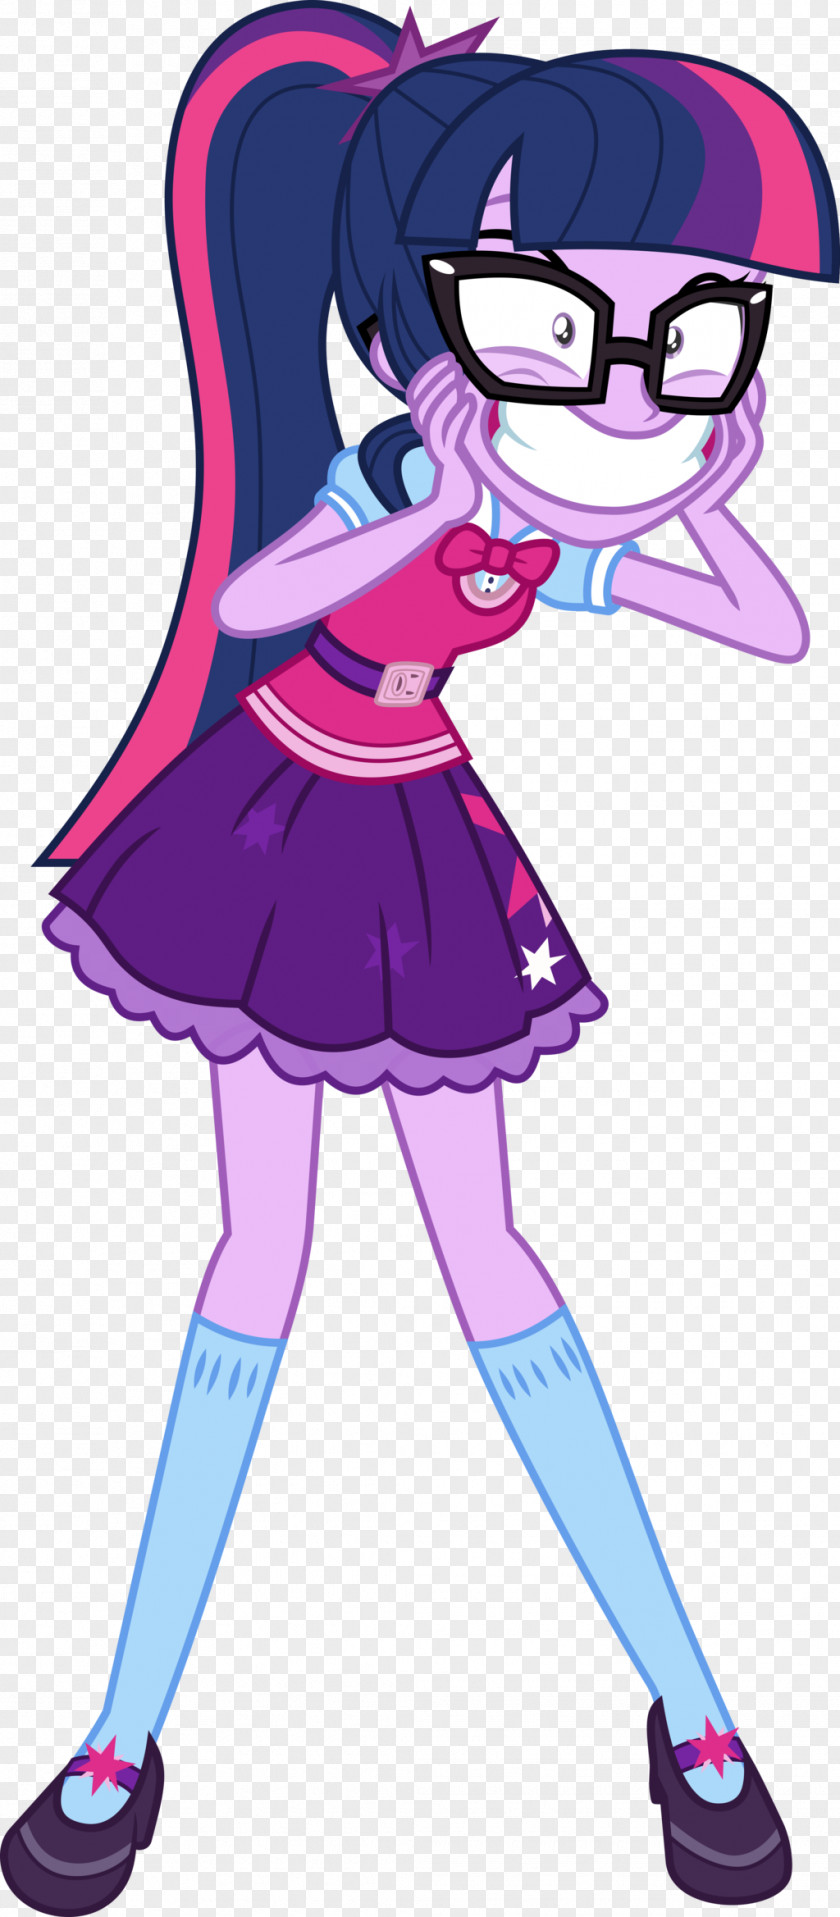 My Little Pony Twilight Sparkle Sunset Shimmer Rarity Pony: Equestria Girls PNG